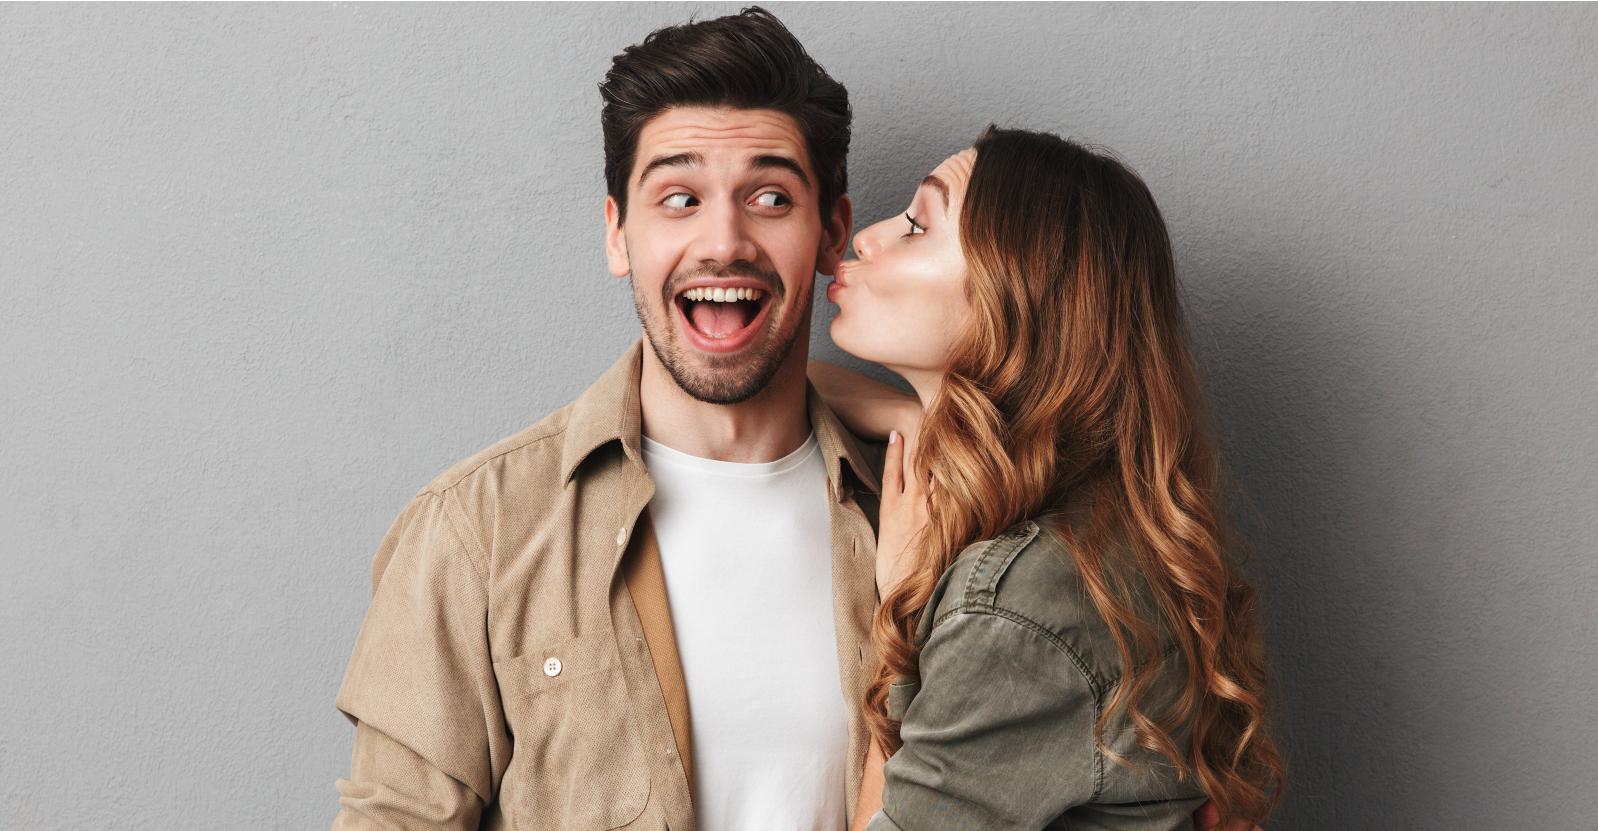 Invisalign kissing, dating, etc. to move into February?